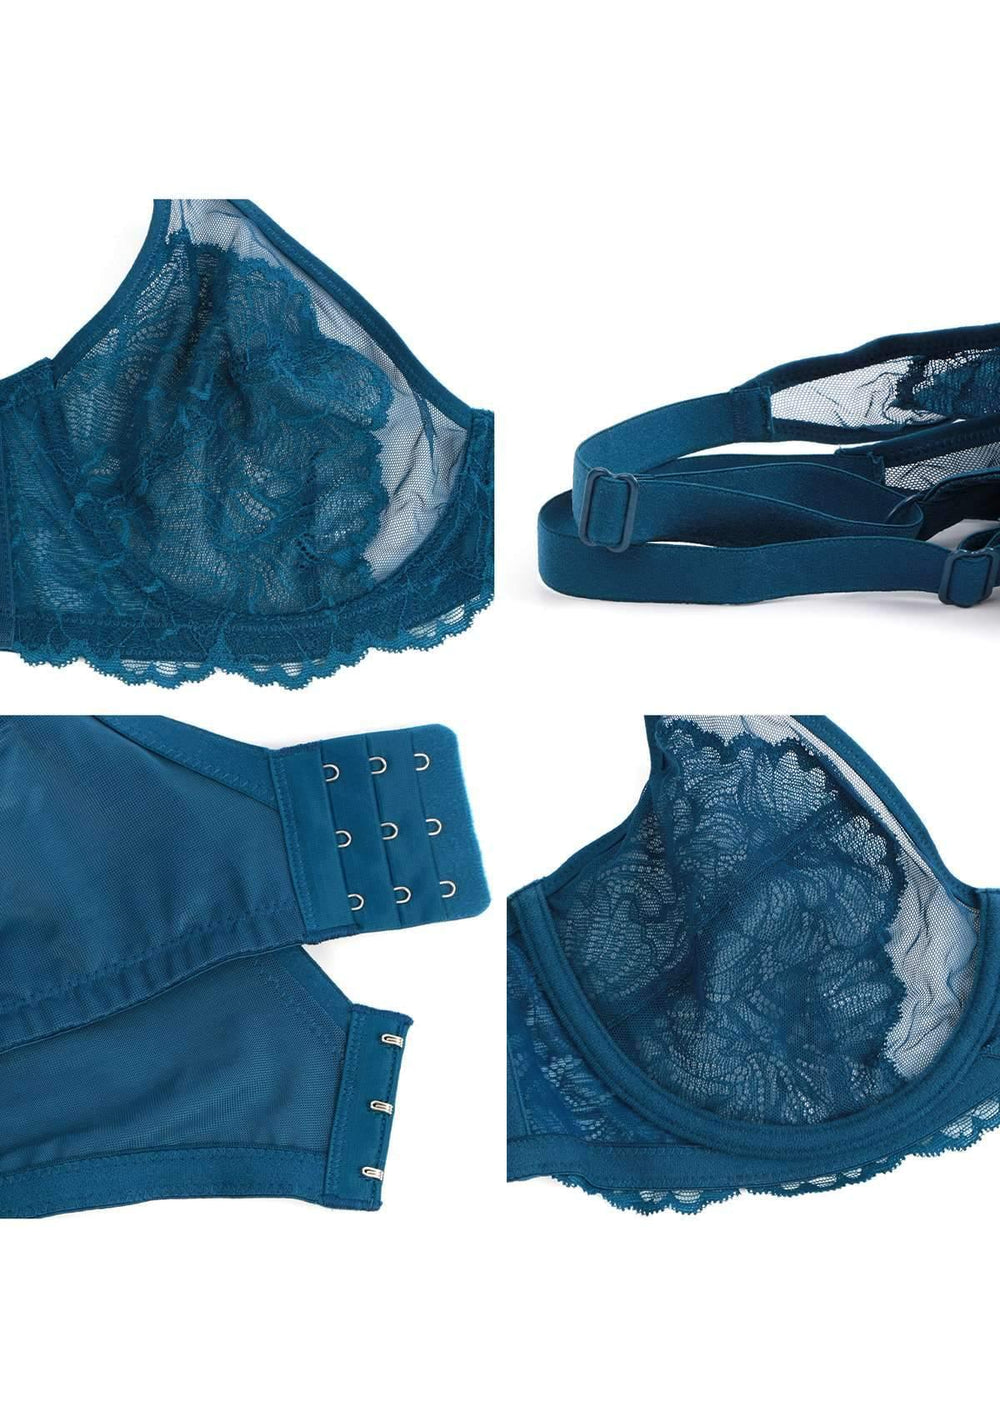 HSIA Blossom Unlined Storm Blue Lace Bra Set